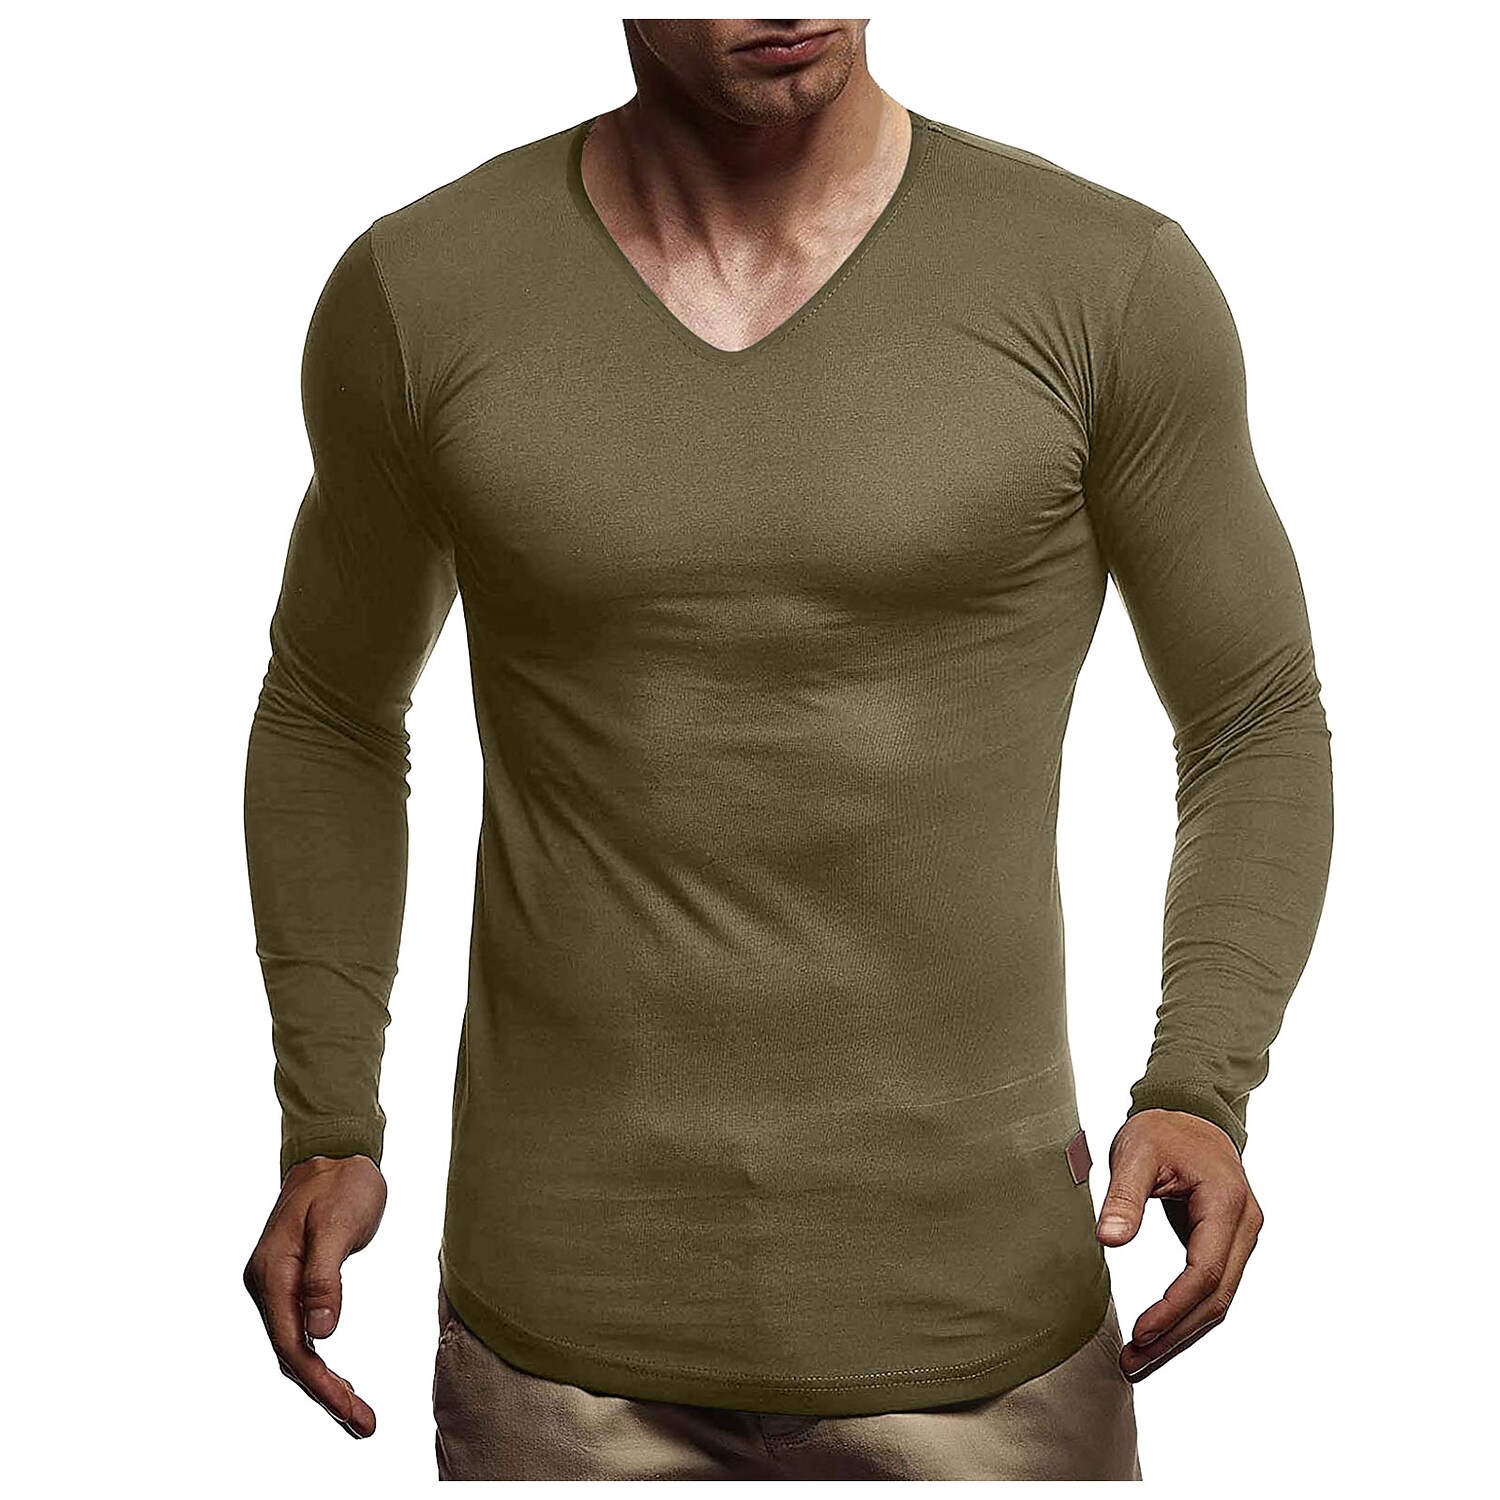 Men's Solid Color Round Neck And V-neck Long-sleeved T-shirt